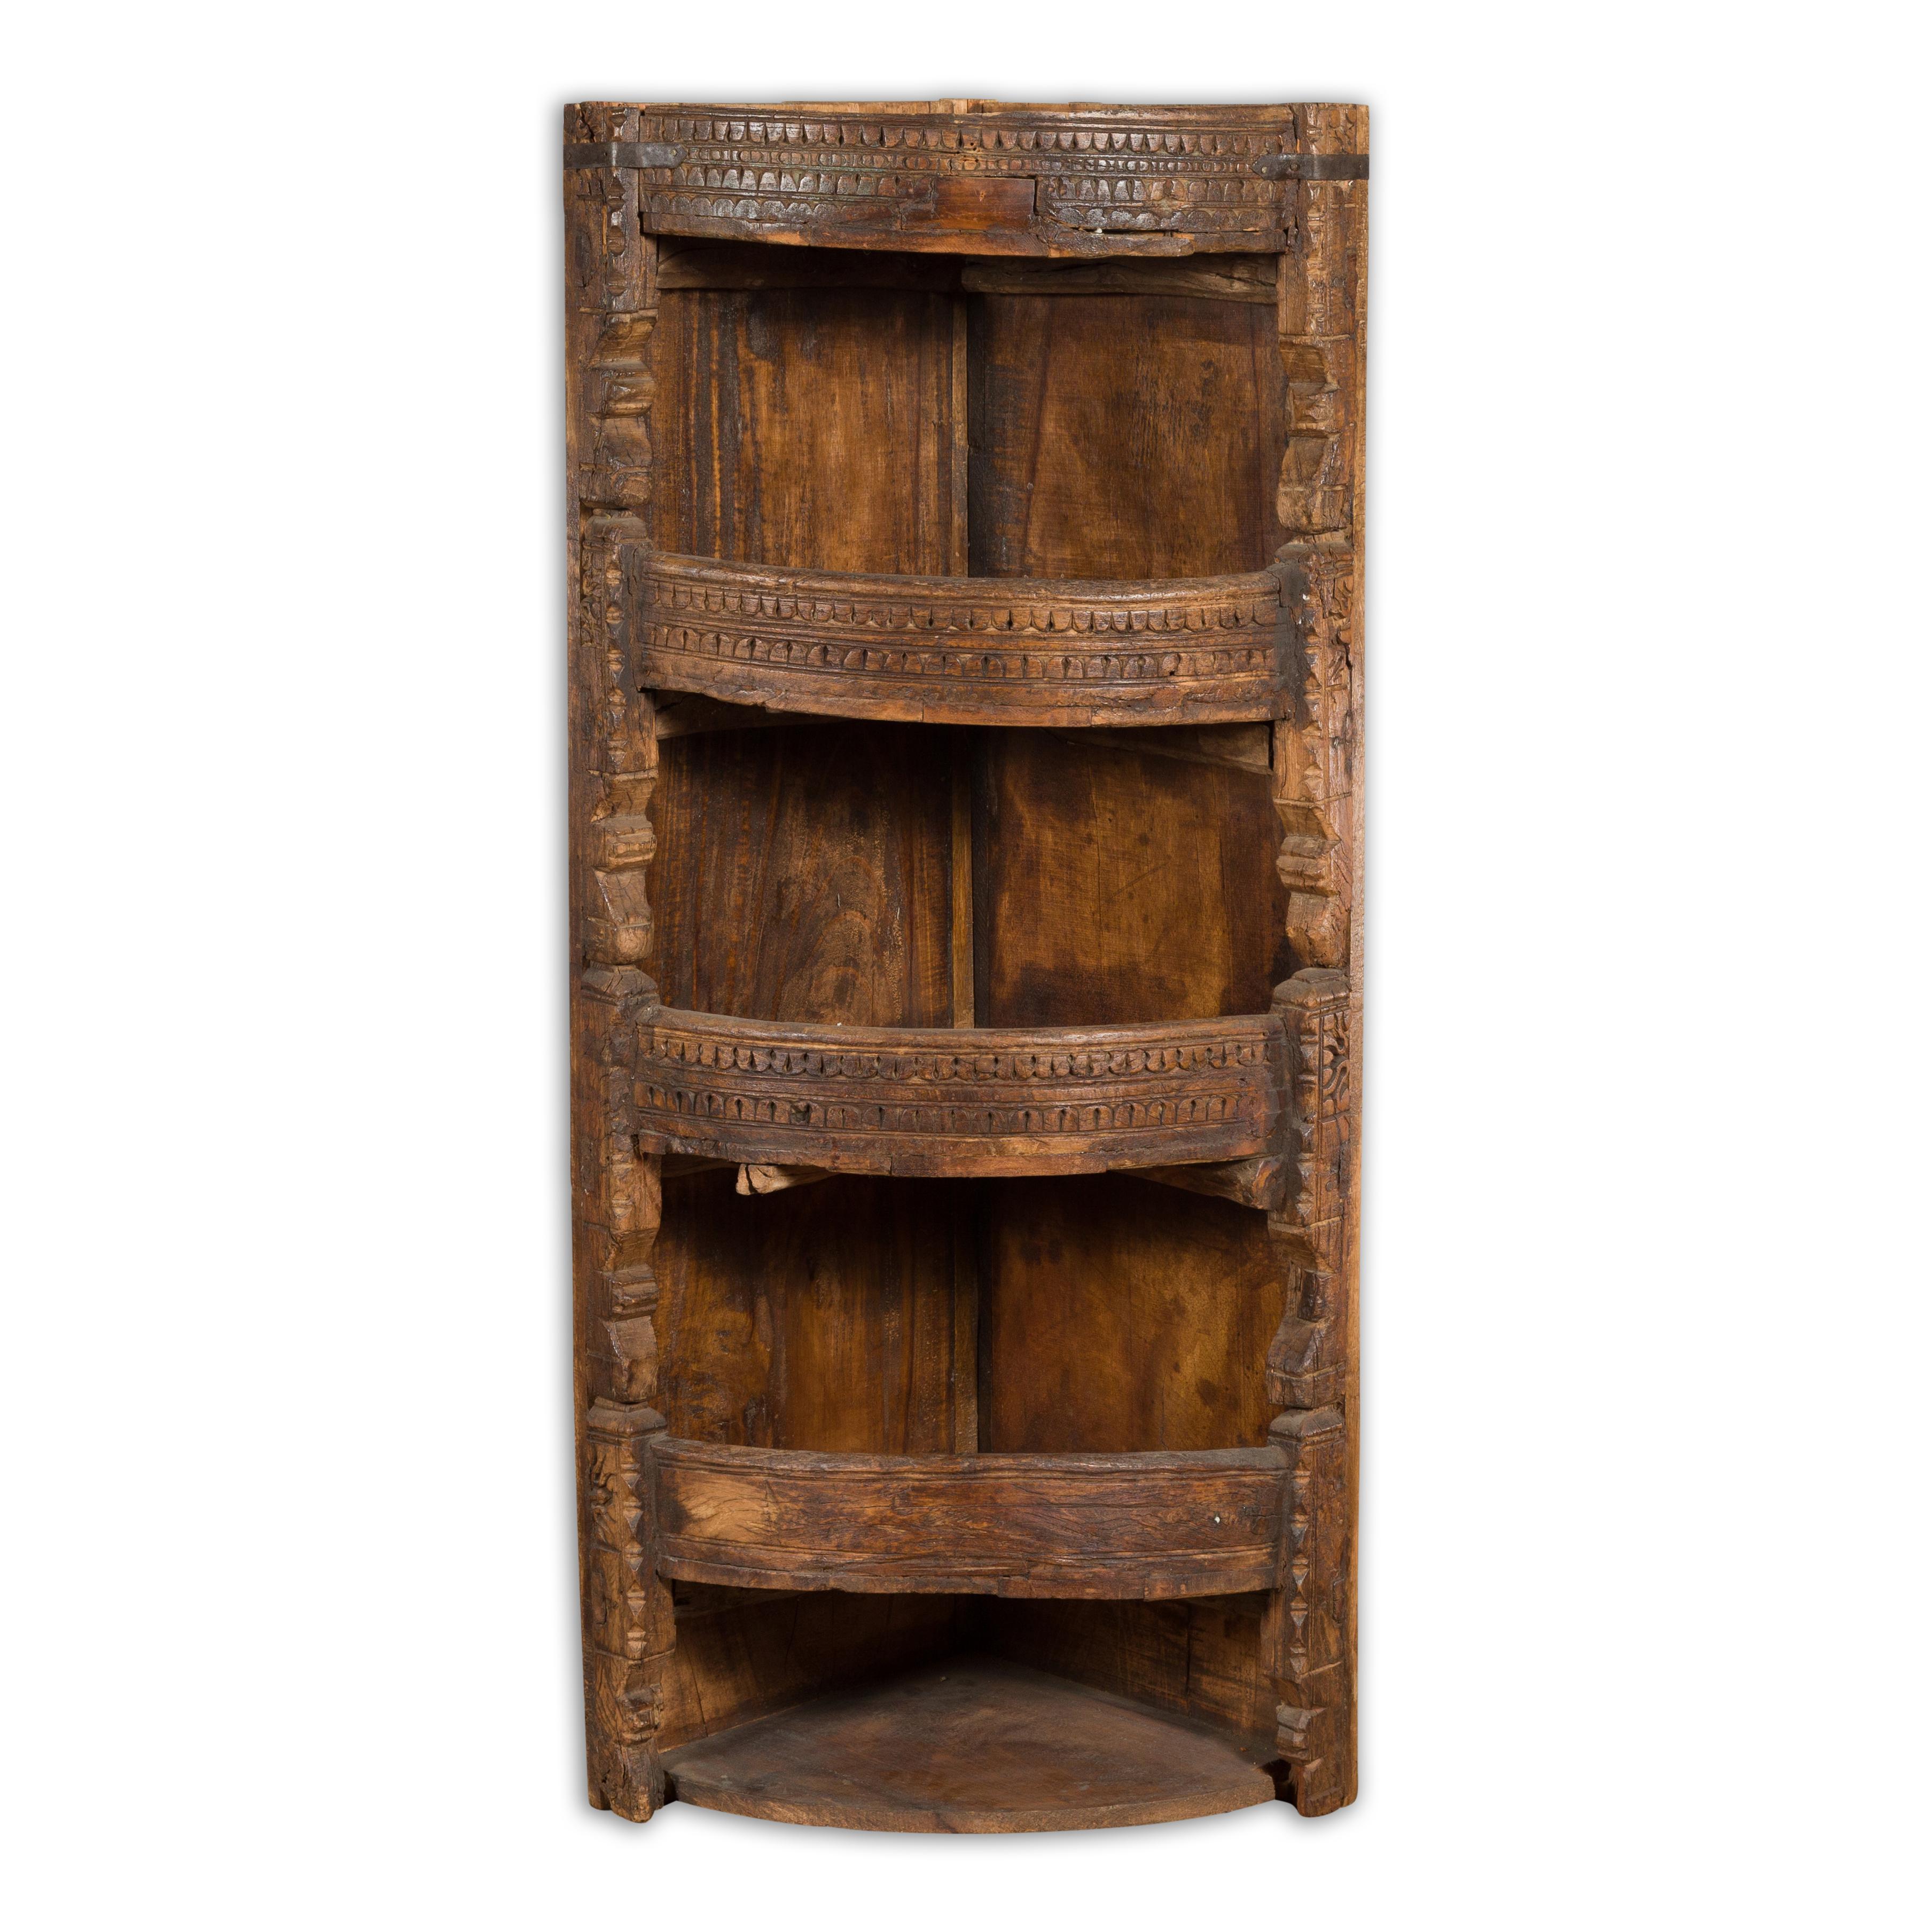 A small Indian rustic wooden corner display cabinet from the 19th century with carved geometric motifs, bow front shelves and weathered appearance. Created in India during the 19th century, this antique wooden corner cabinet charms us with its small